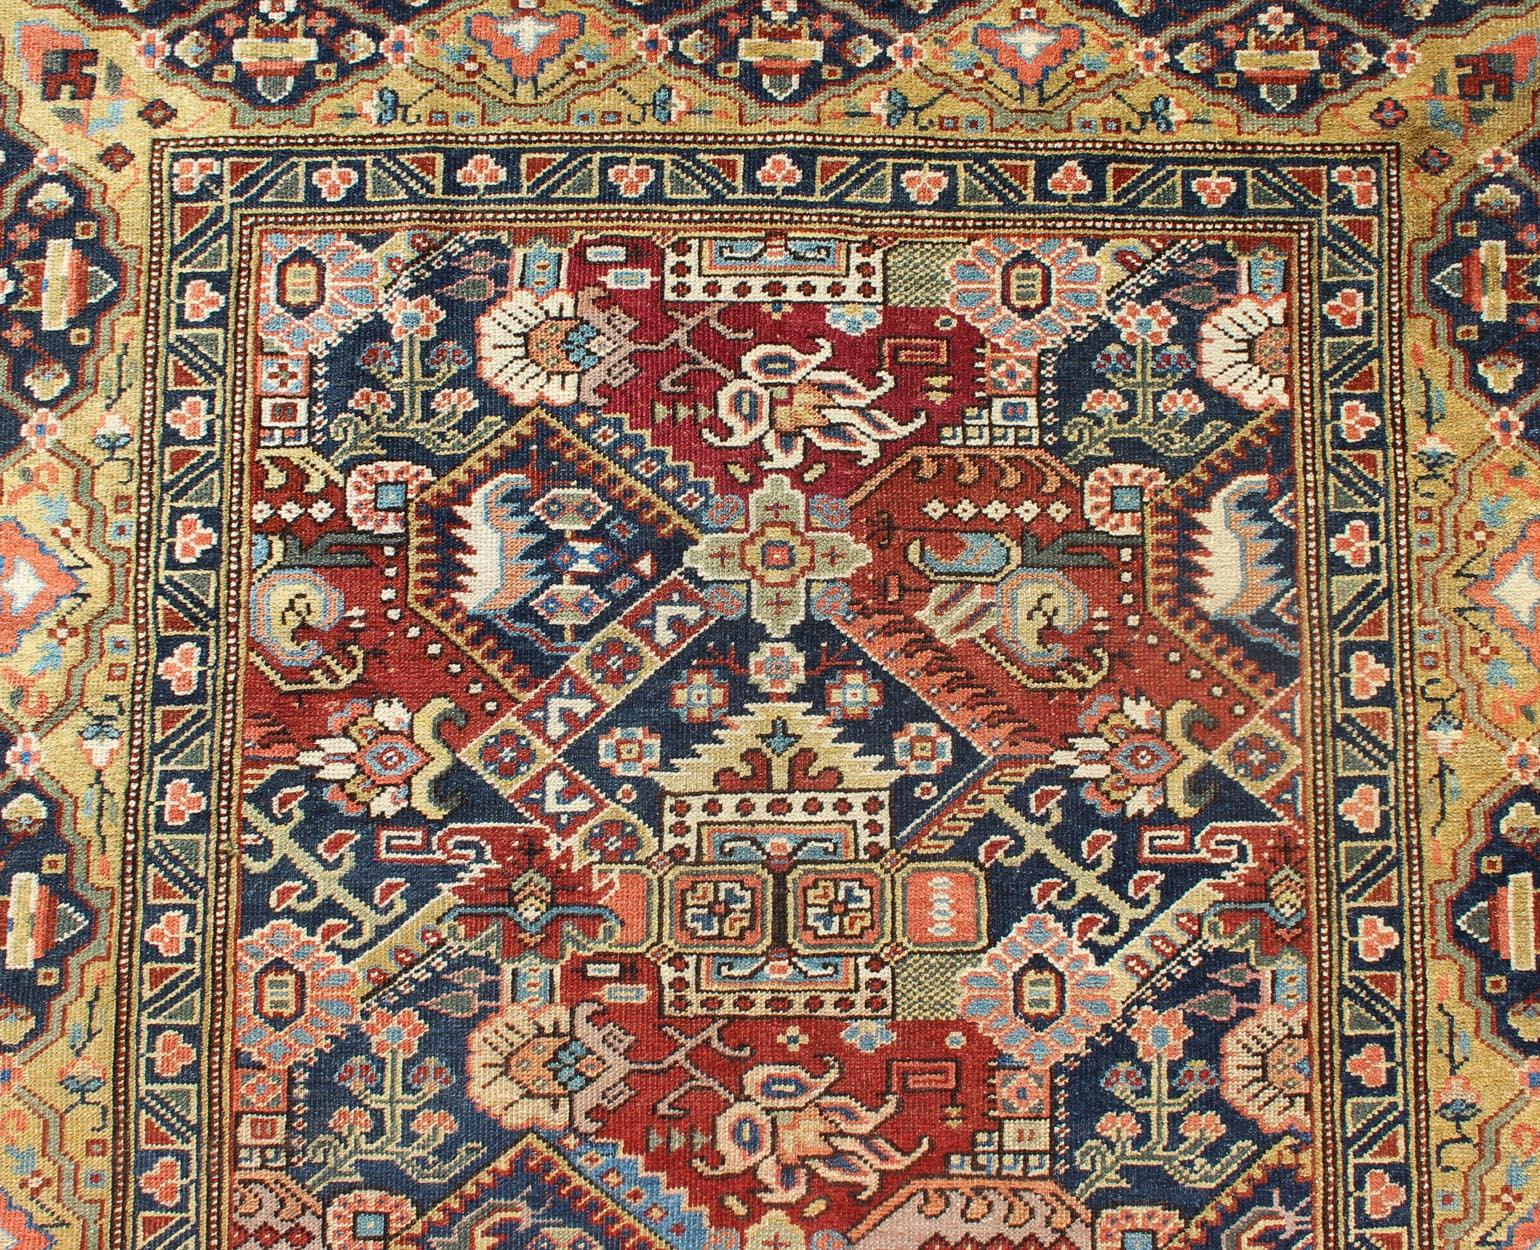 Wool 19th Century Exquisite Antique Caucasian Seychour Rug In Red's And Blue's For Sale